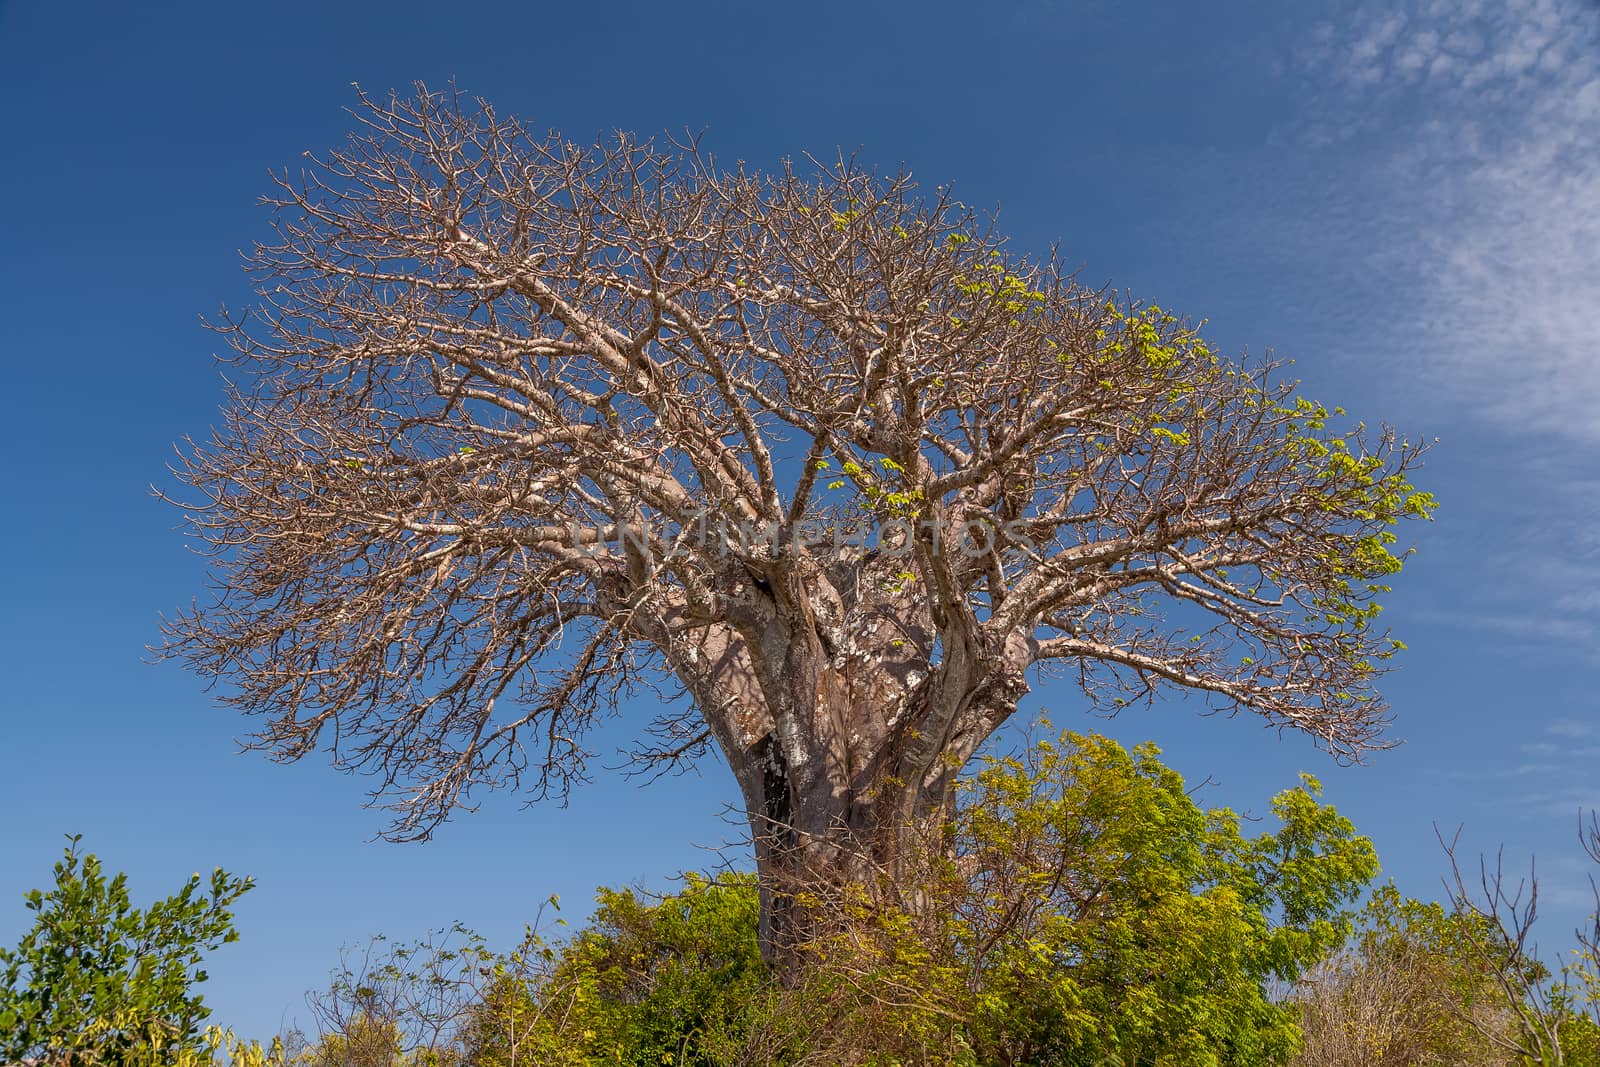 The dry tree and blue sky by master1305